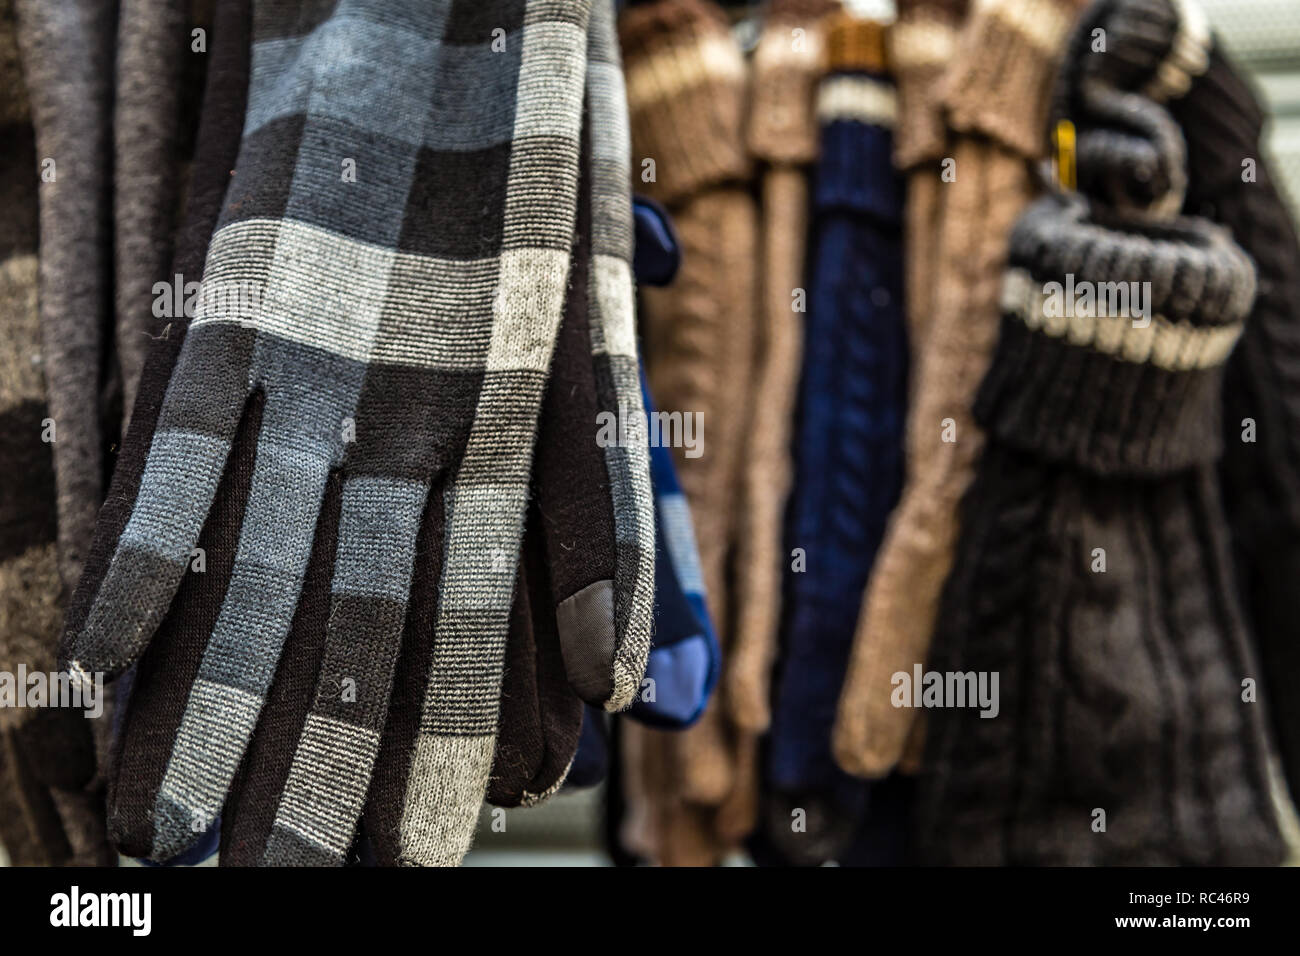 wool gloves hanged for sale Stock Photo